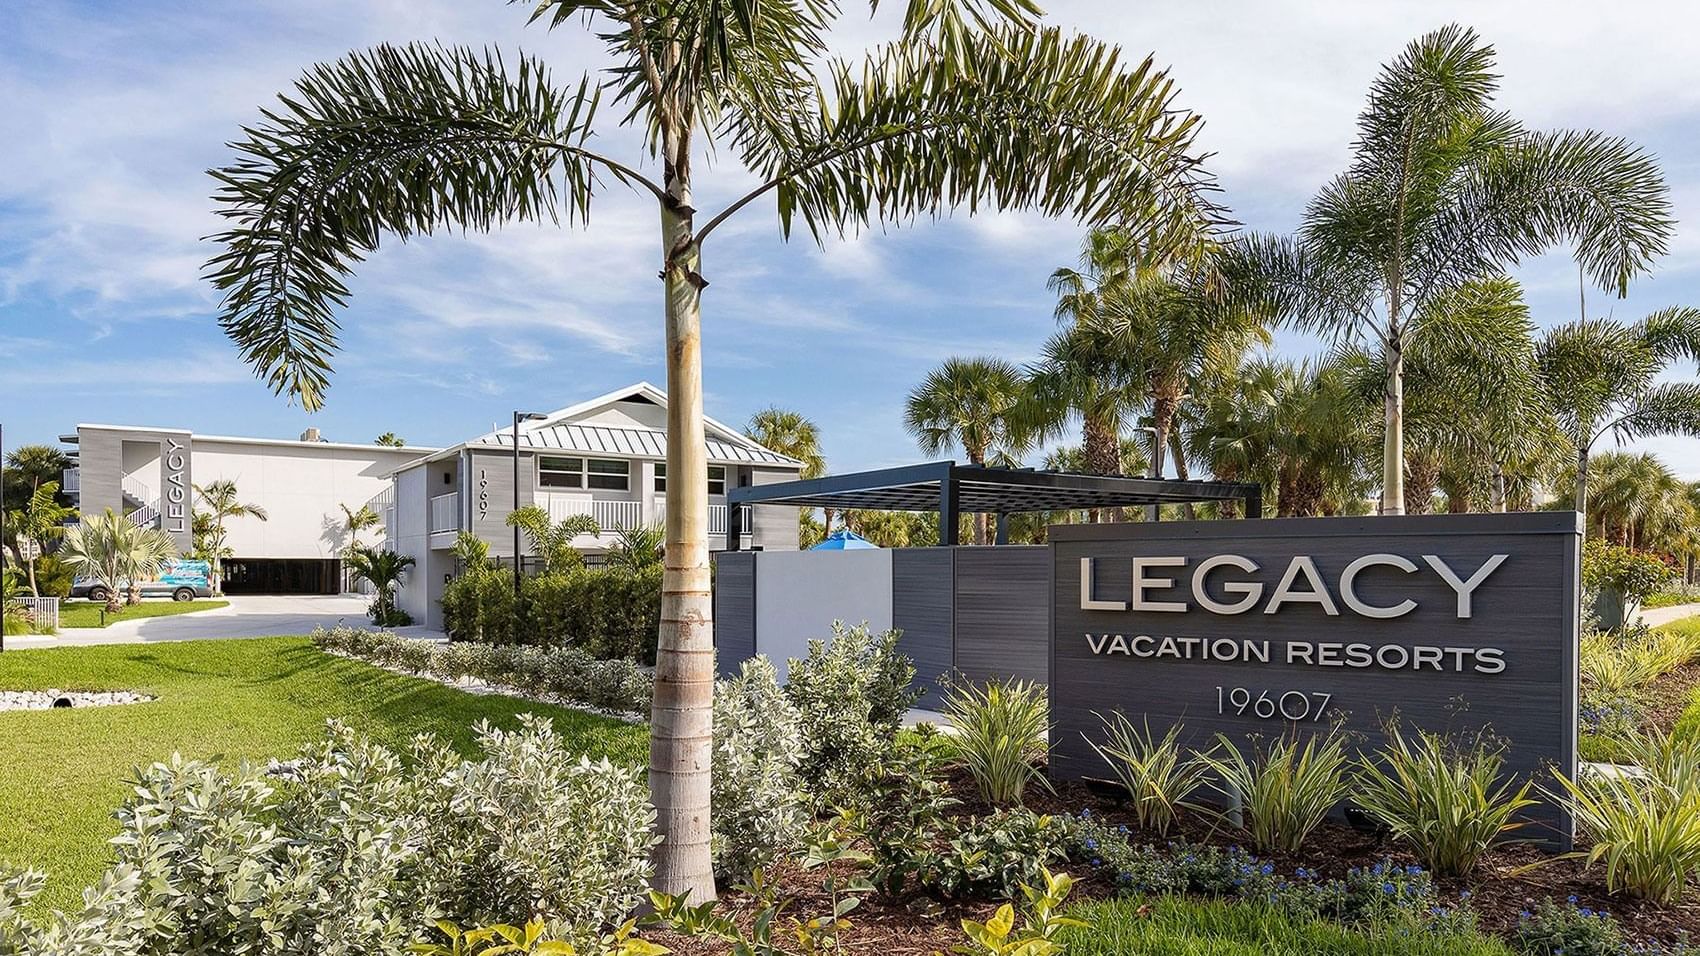  Exterior view of the garden area at Legacy Vacation Resorts 